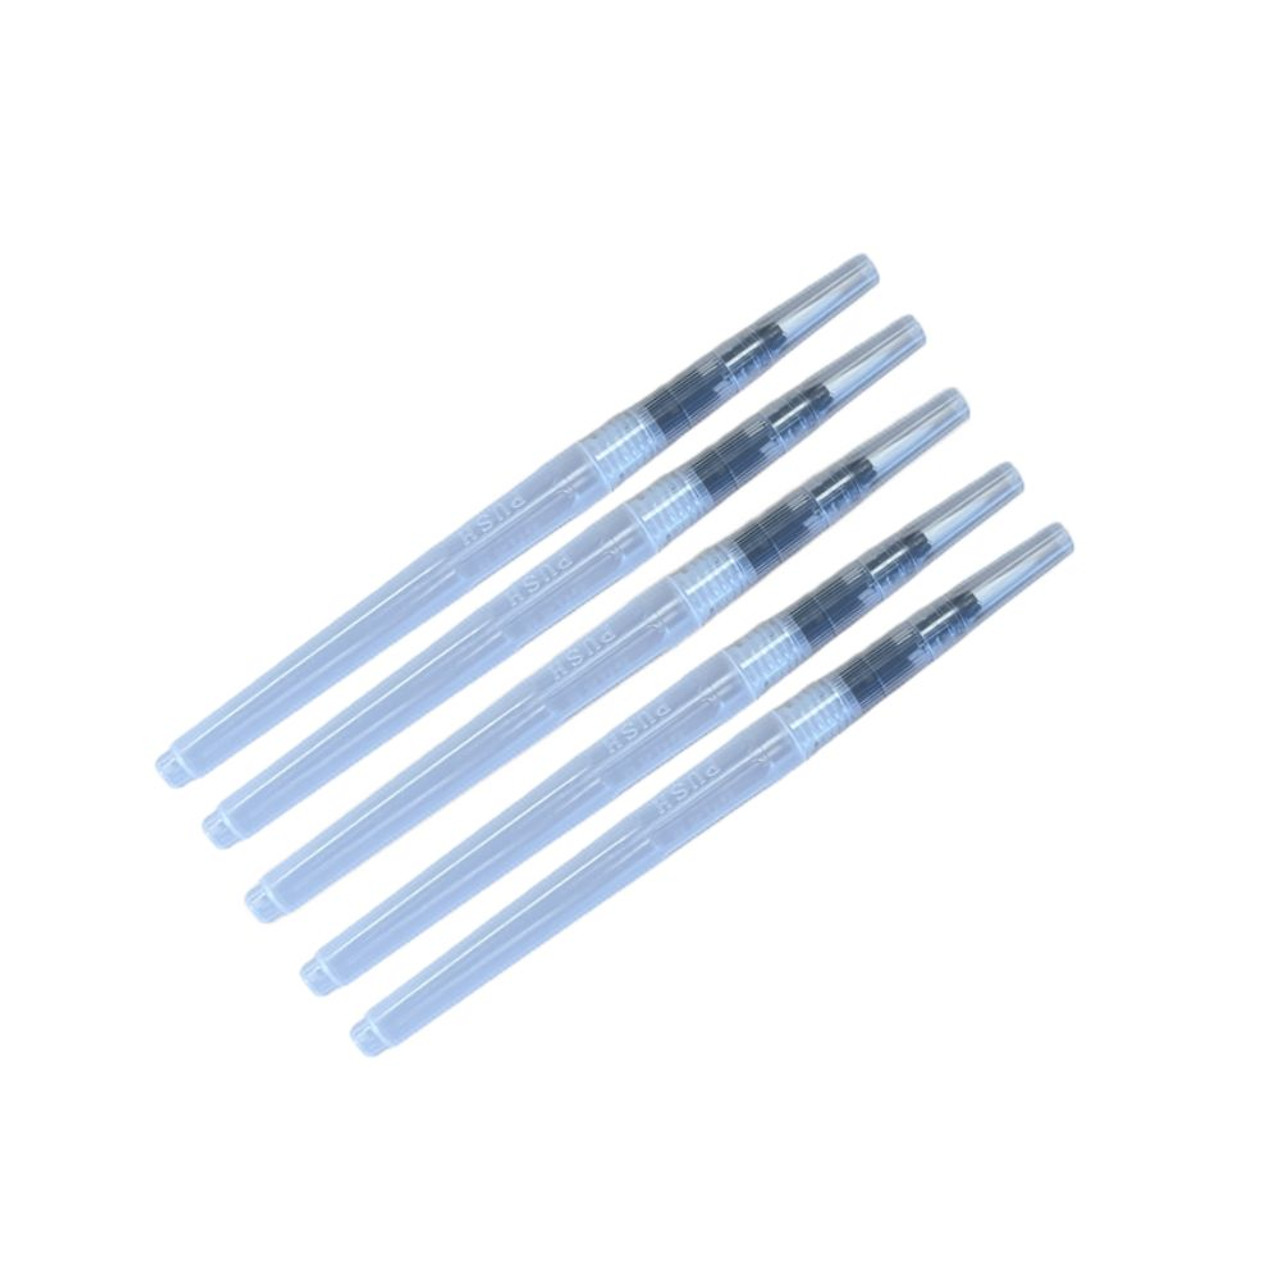 Water & Oil Brush for Metal Clay and Art 5pk